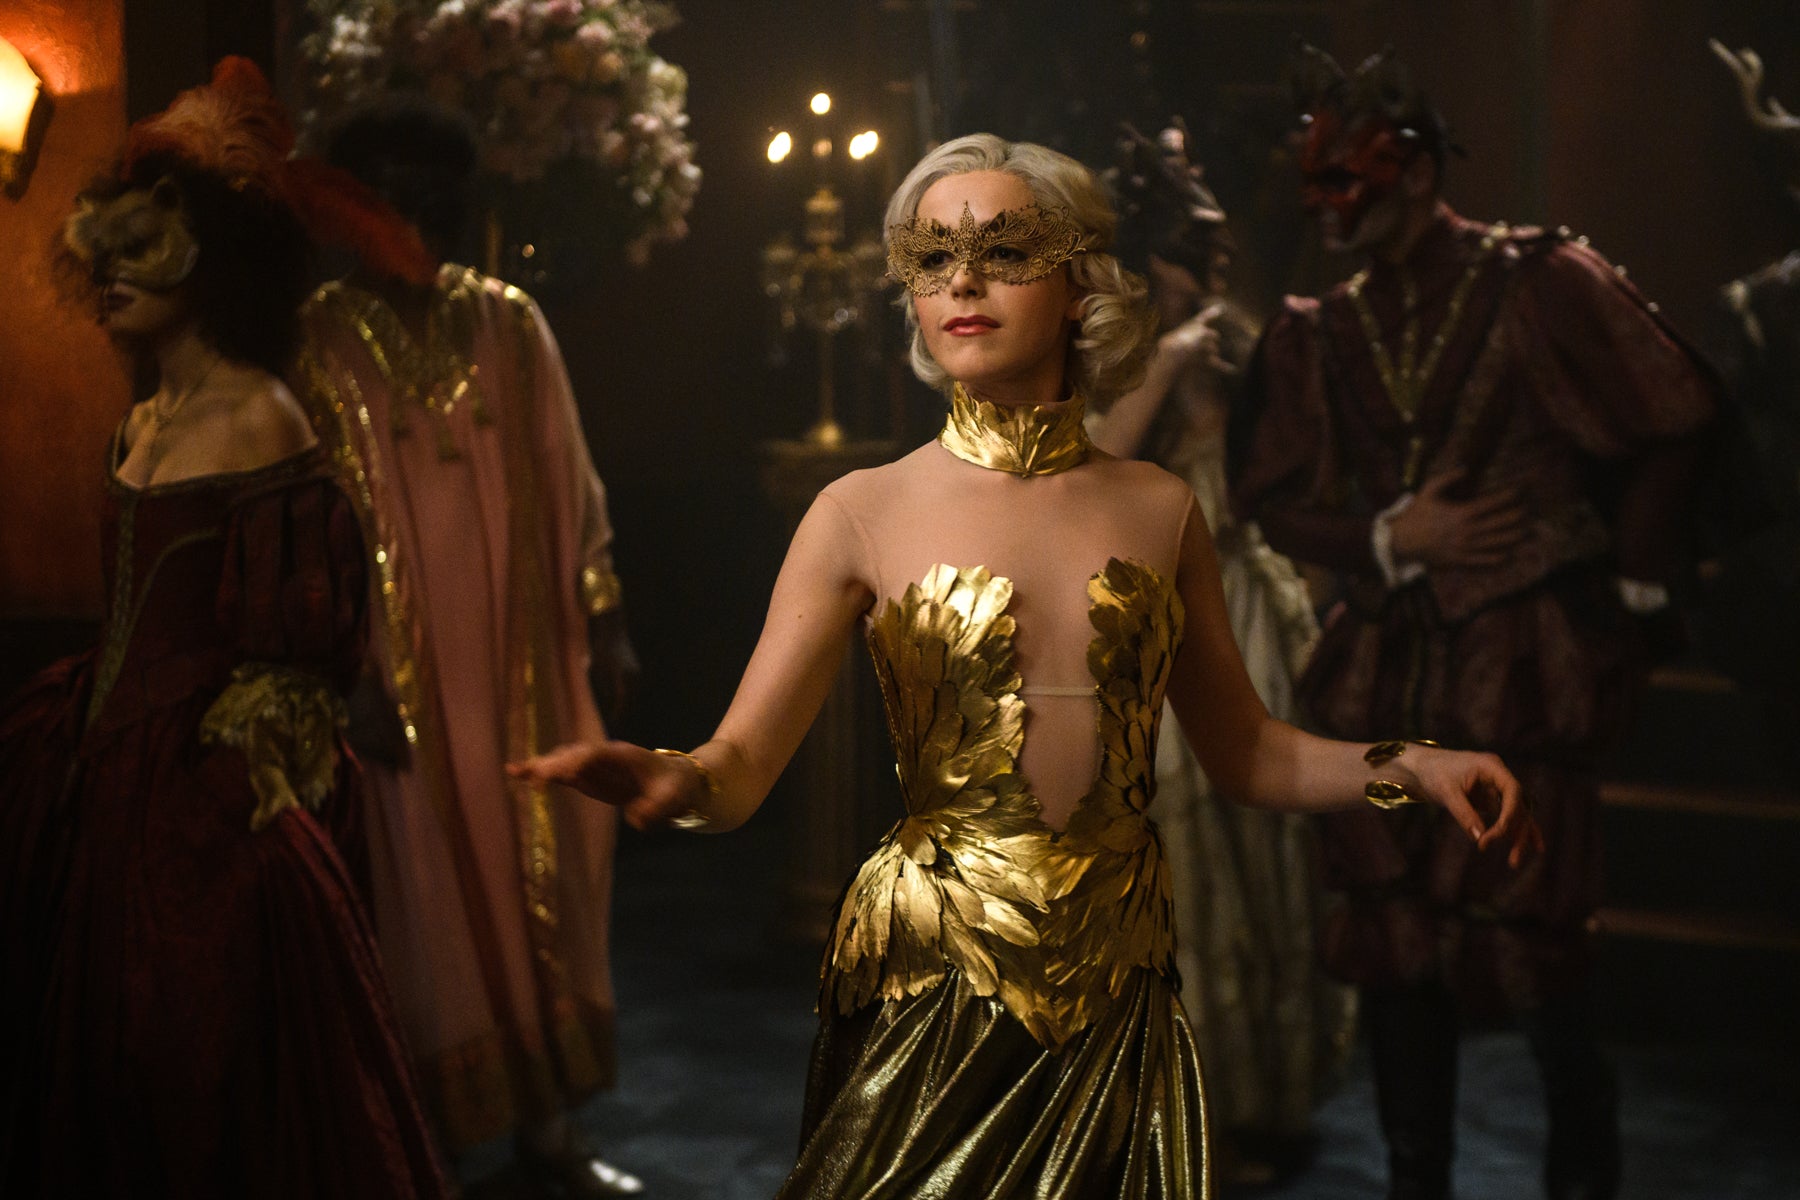 Sabrina Spellman dances in a gold dress and mask in a scene from Chilling Adventures of Sabrina.